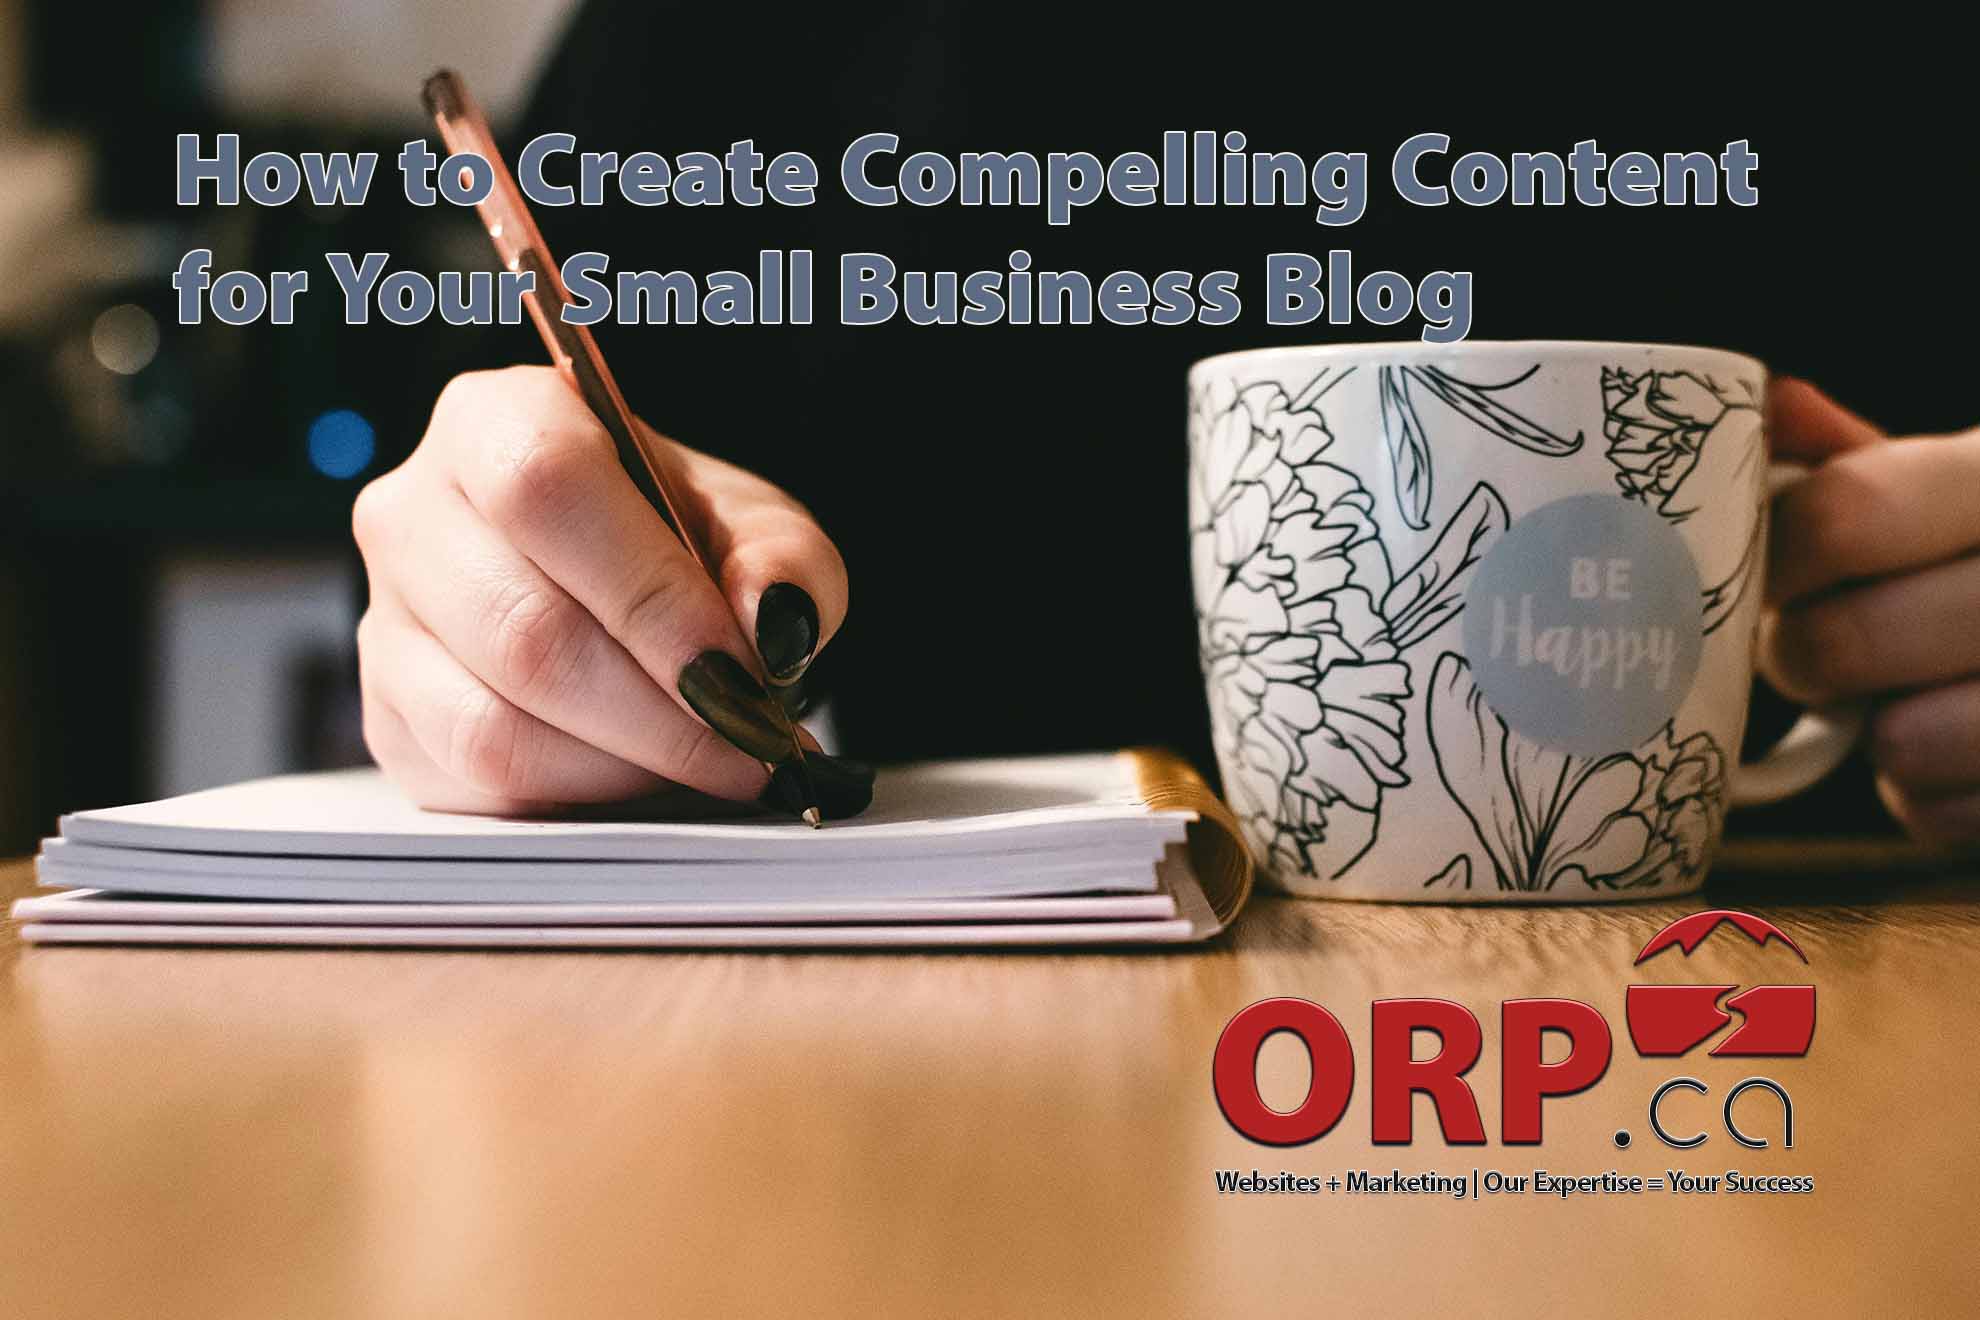 A Beginners Guide: How to Create Compelling Content for Your Small Business Blog a small business digital marketing article from ORP.ca - Website design and support, digital marketing and consulting services.